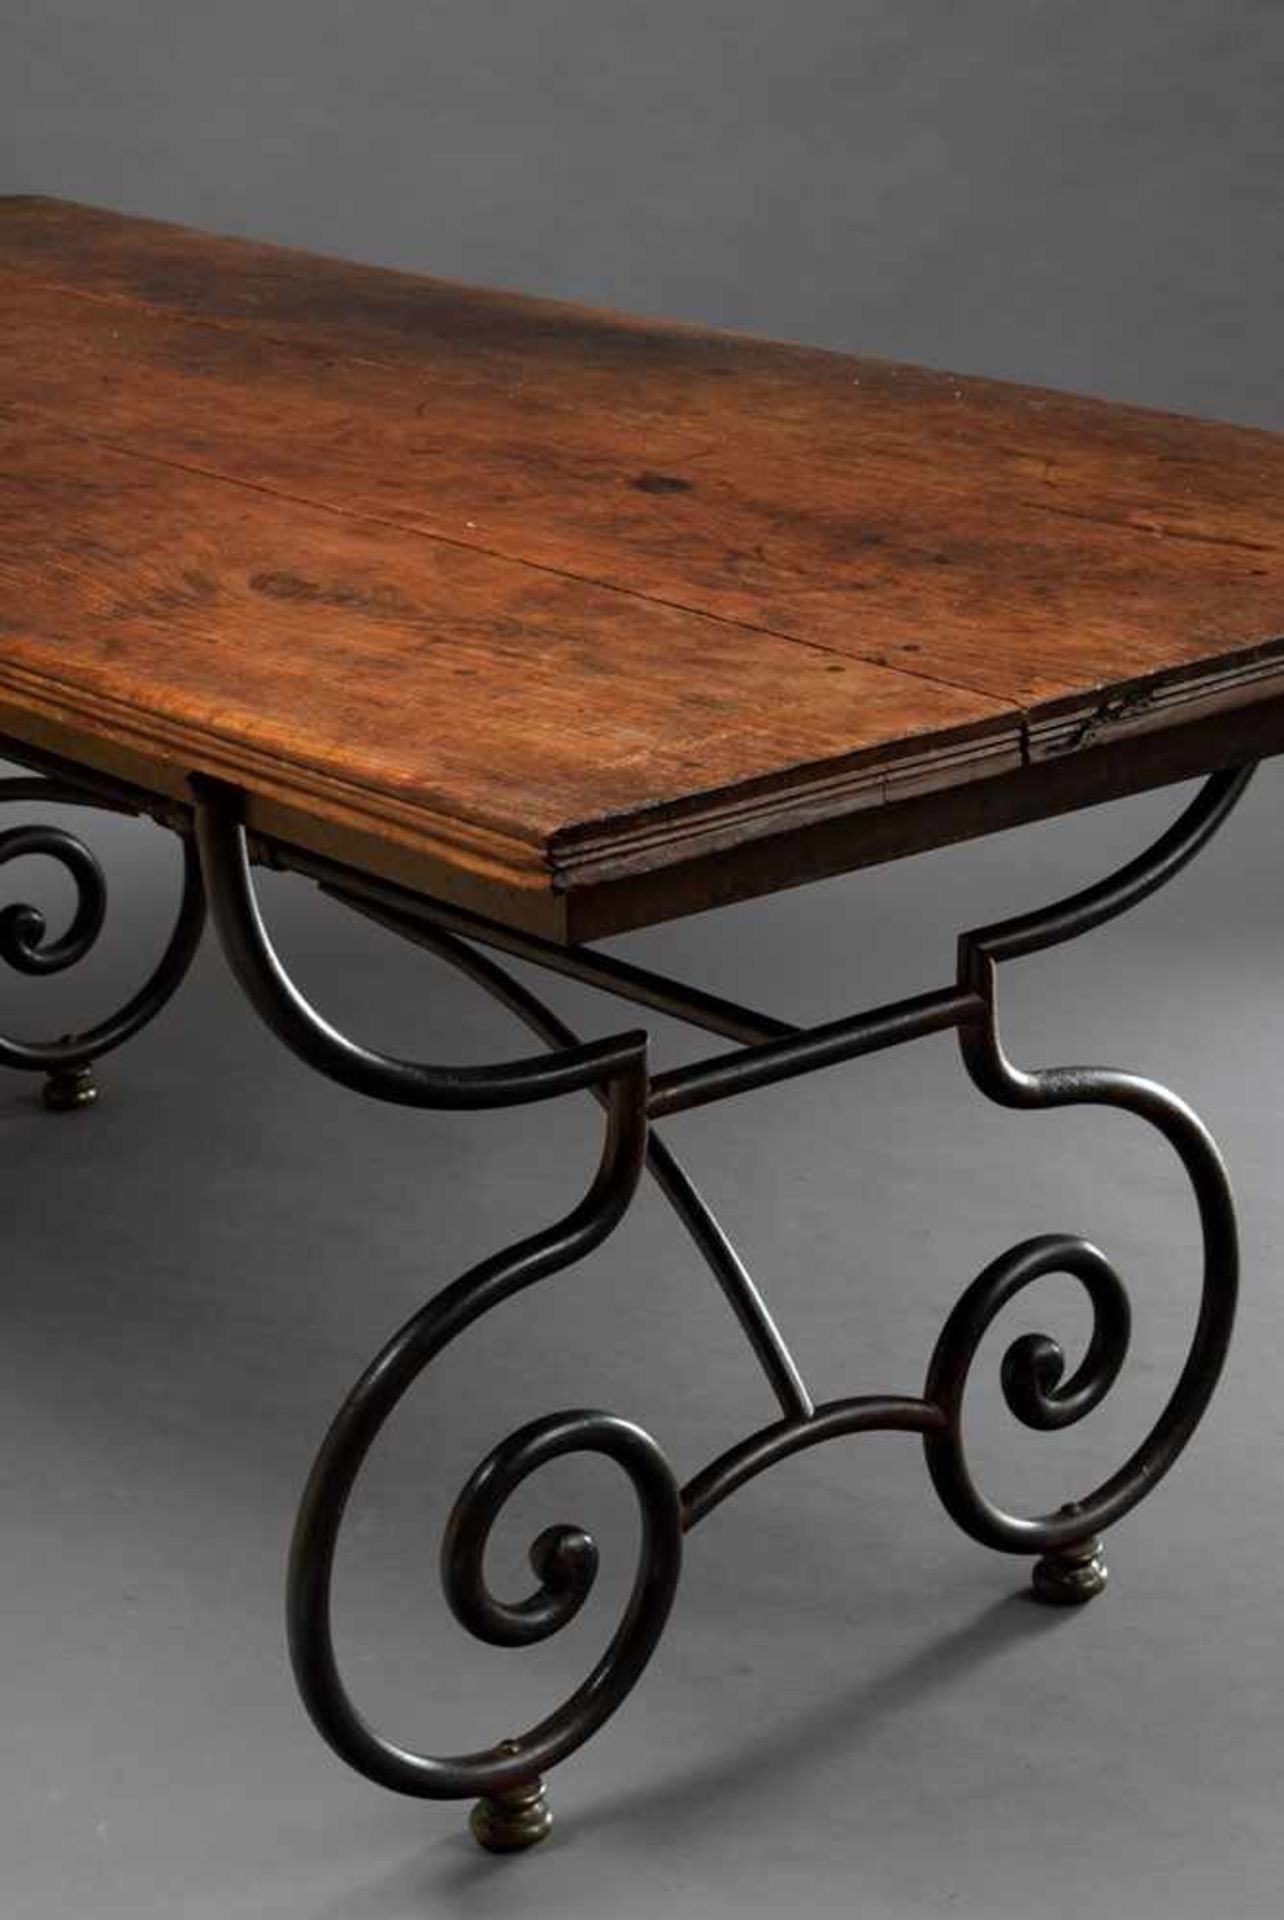 Large french shop table on forged iron frame, 75.5x189x91.5cm, acquired from Hans Otto Beute/Hbg. - Image 2 of 4